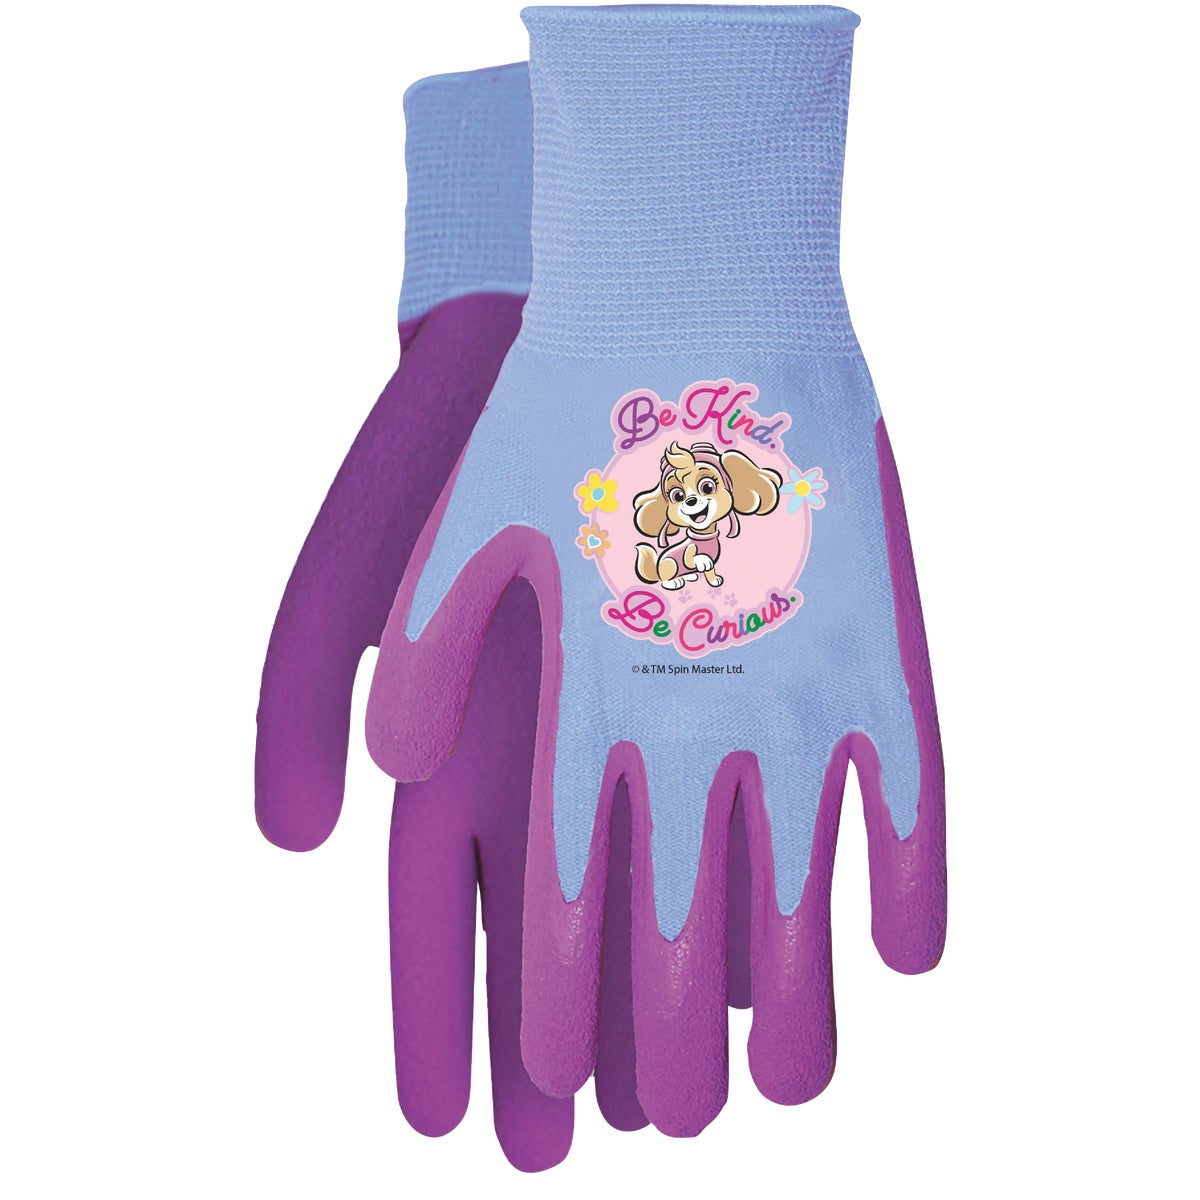 Item 706477, Garden glove made of 95% polyester, 5% spandex liner, and 100% latex 